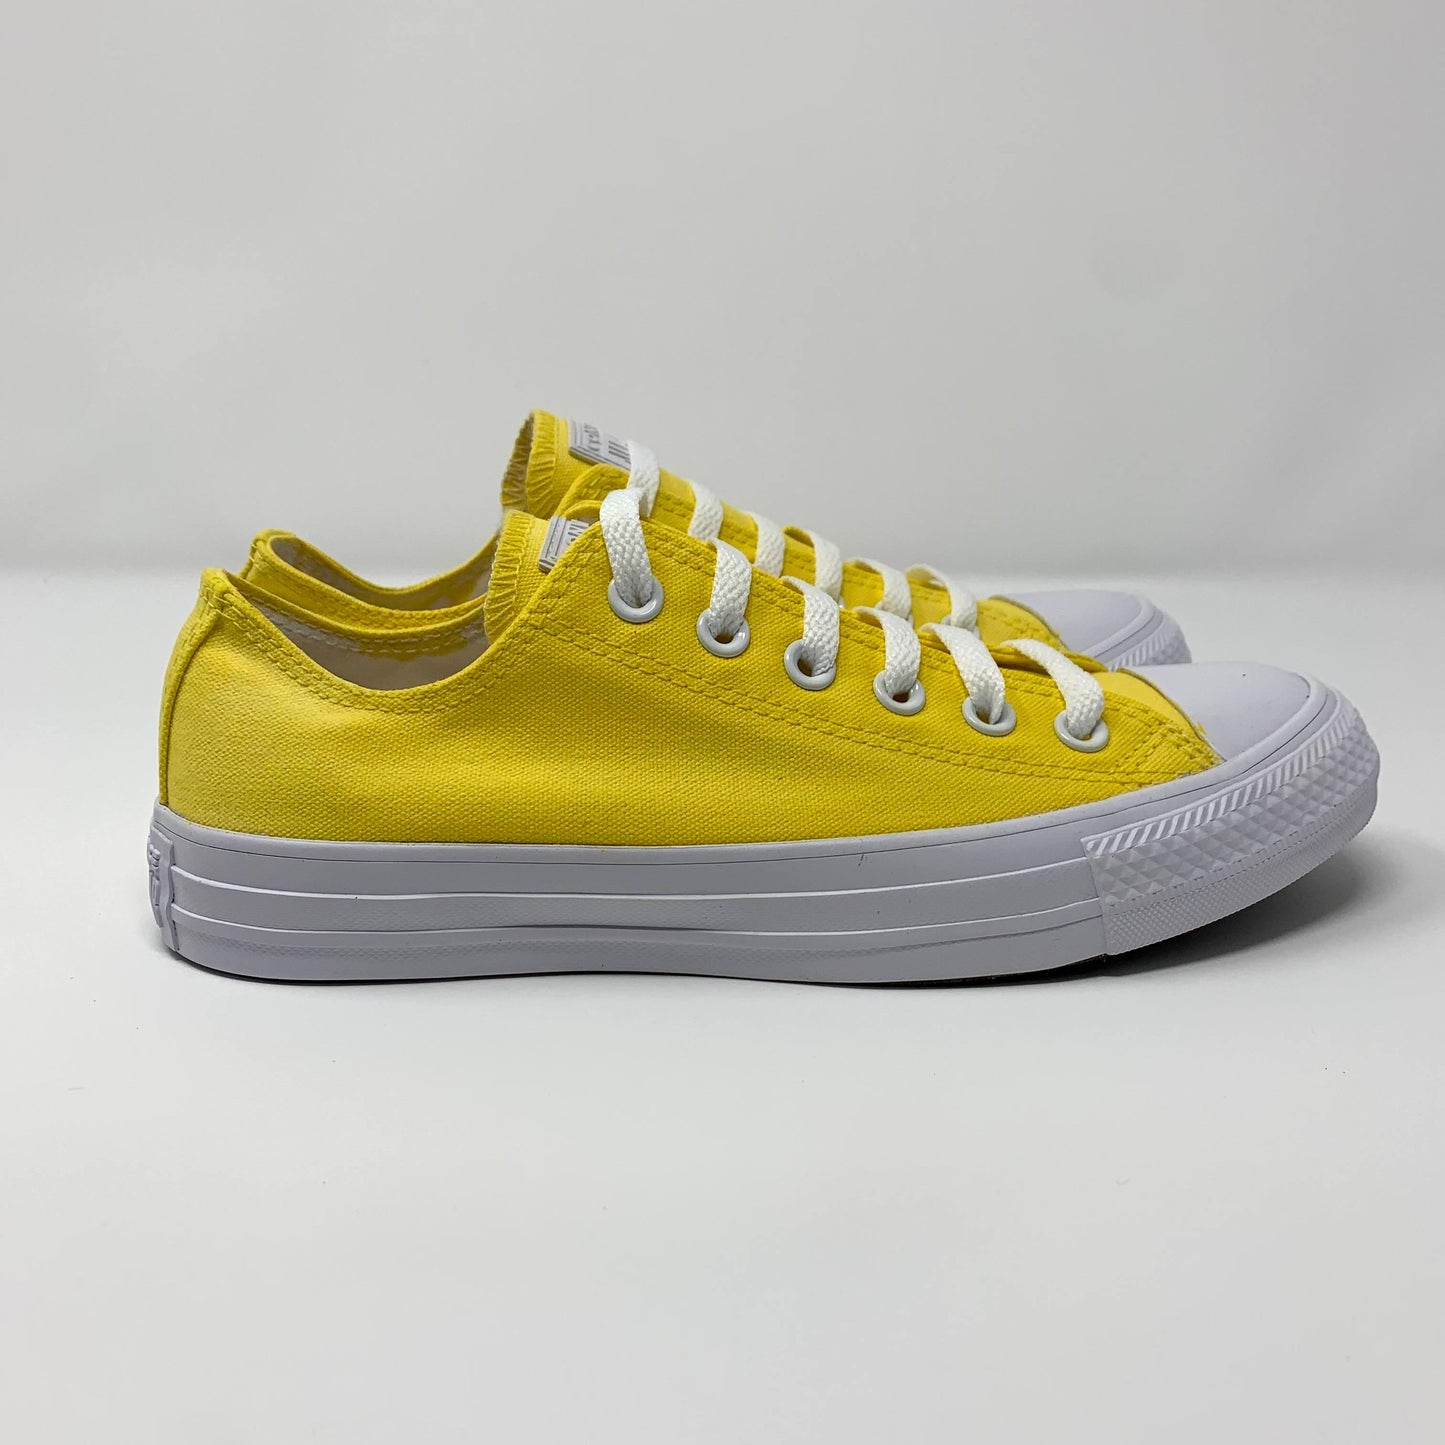 Banana Yellow Low Converse Shoes with white background